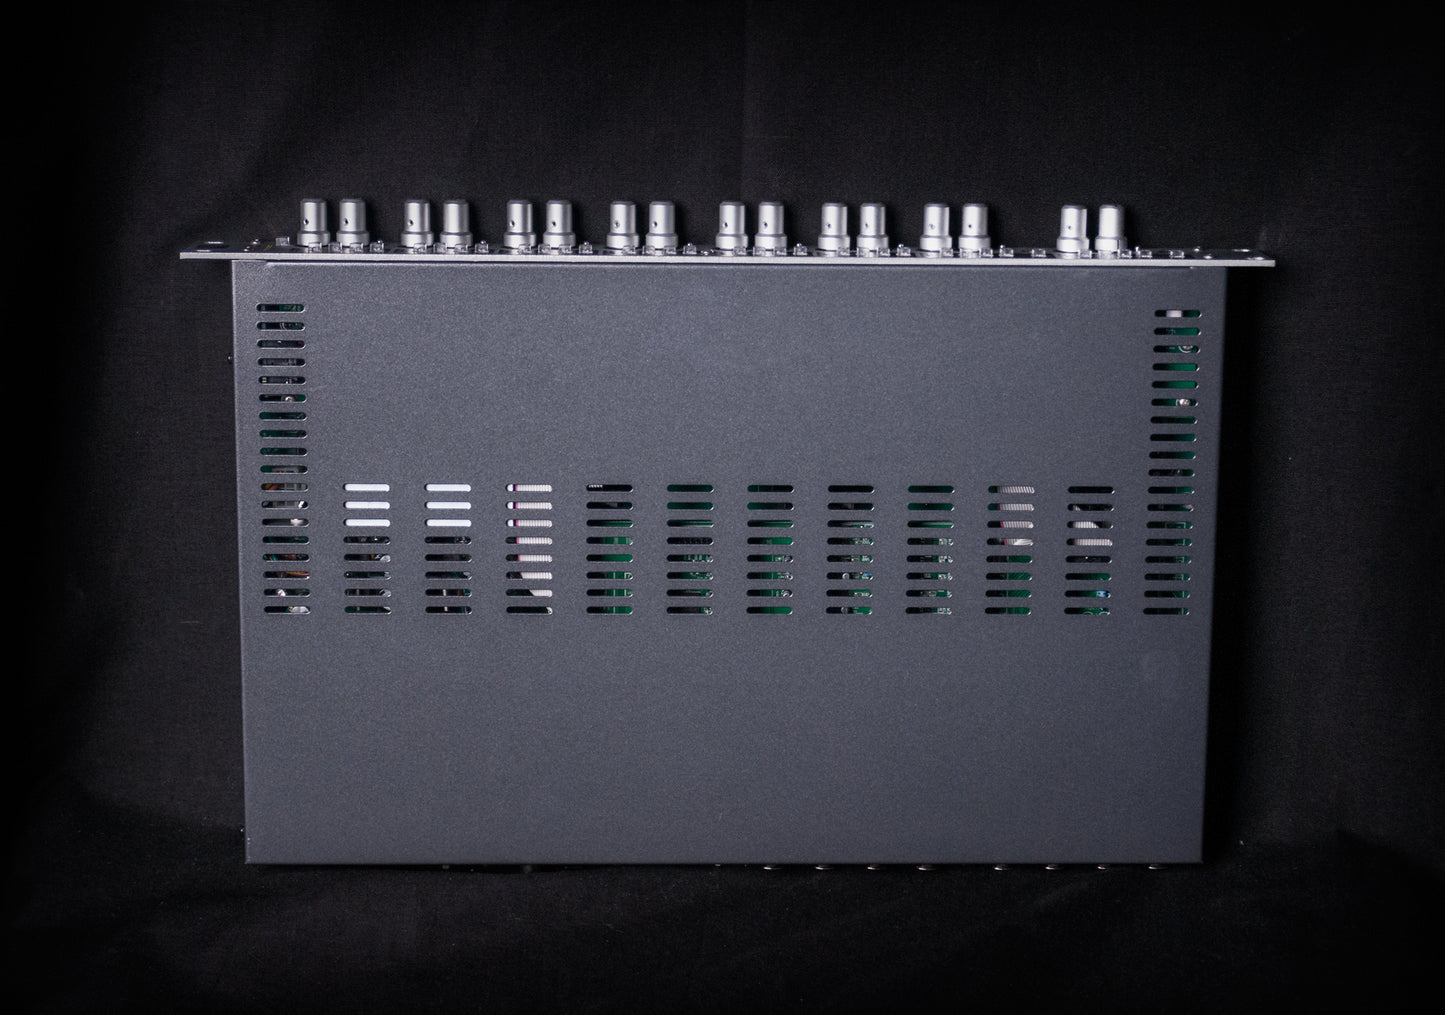 Audient ASP880 8-Channel Class A Mic Preamplifier and ADC